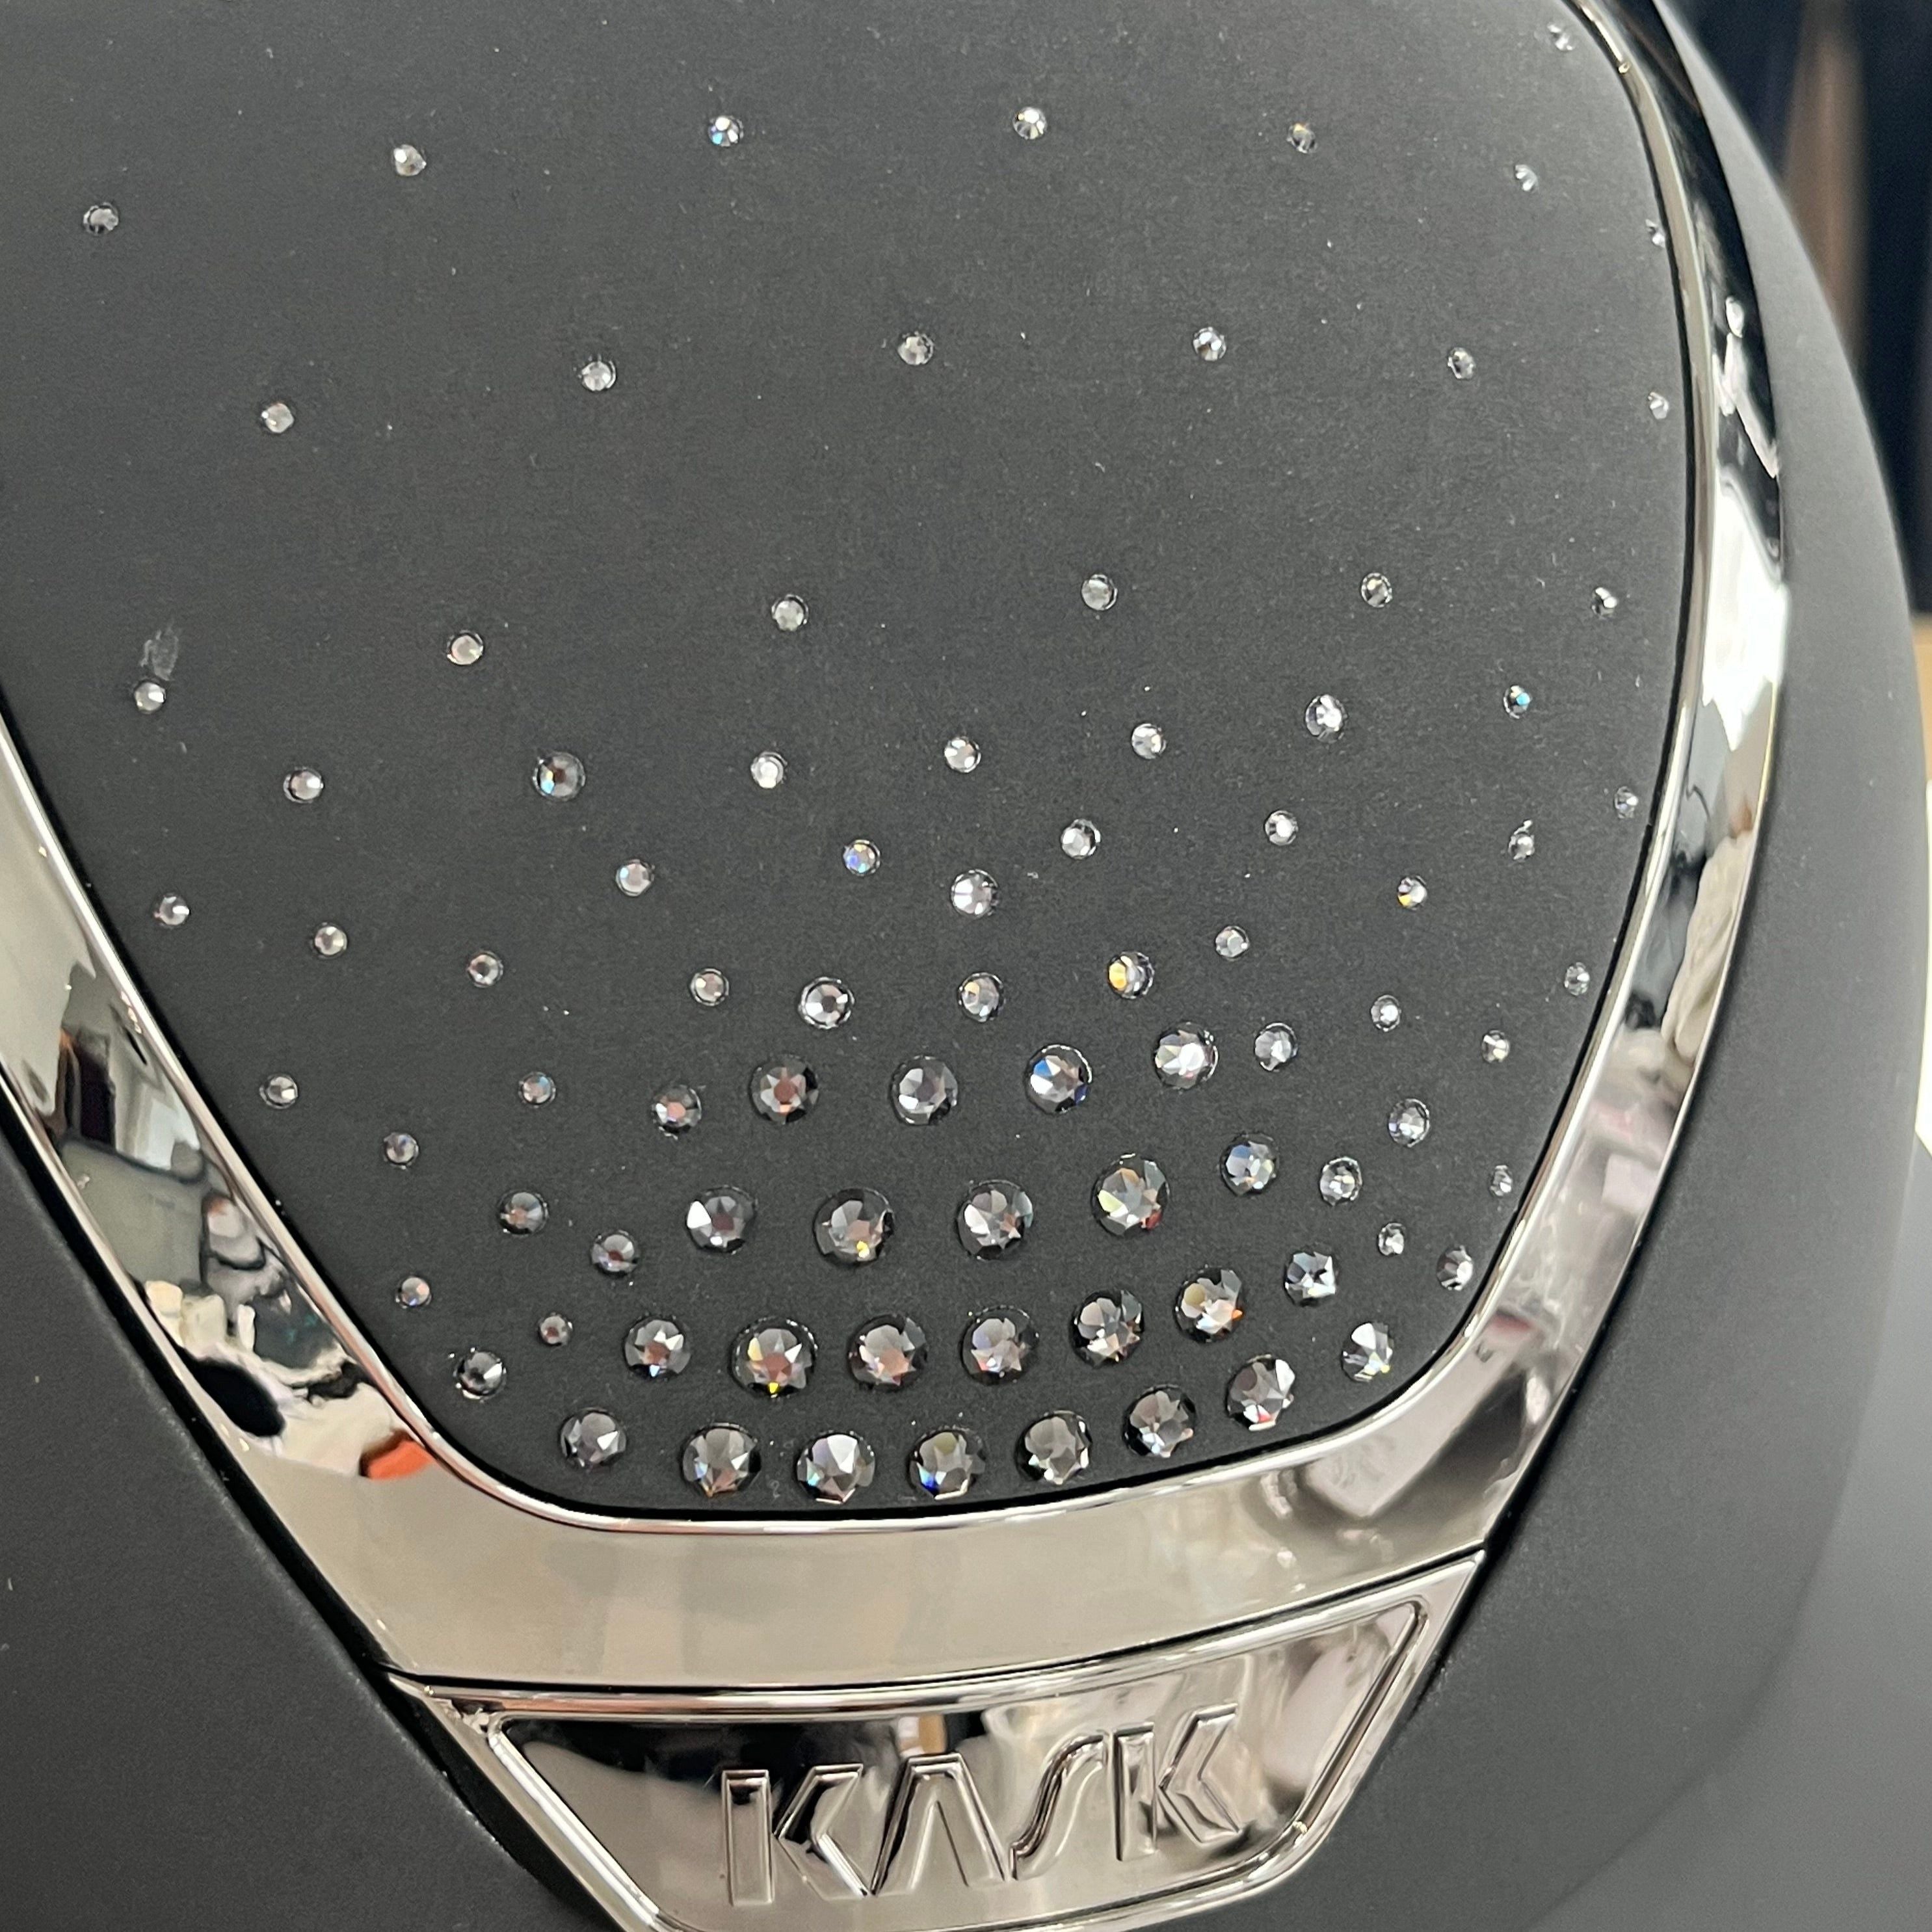 Kask Star Lady Black graphite swarovski passage crystals Chrome Black L- in stock and ready to ship!